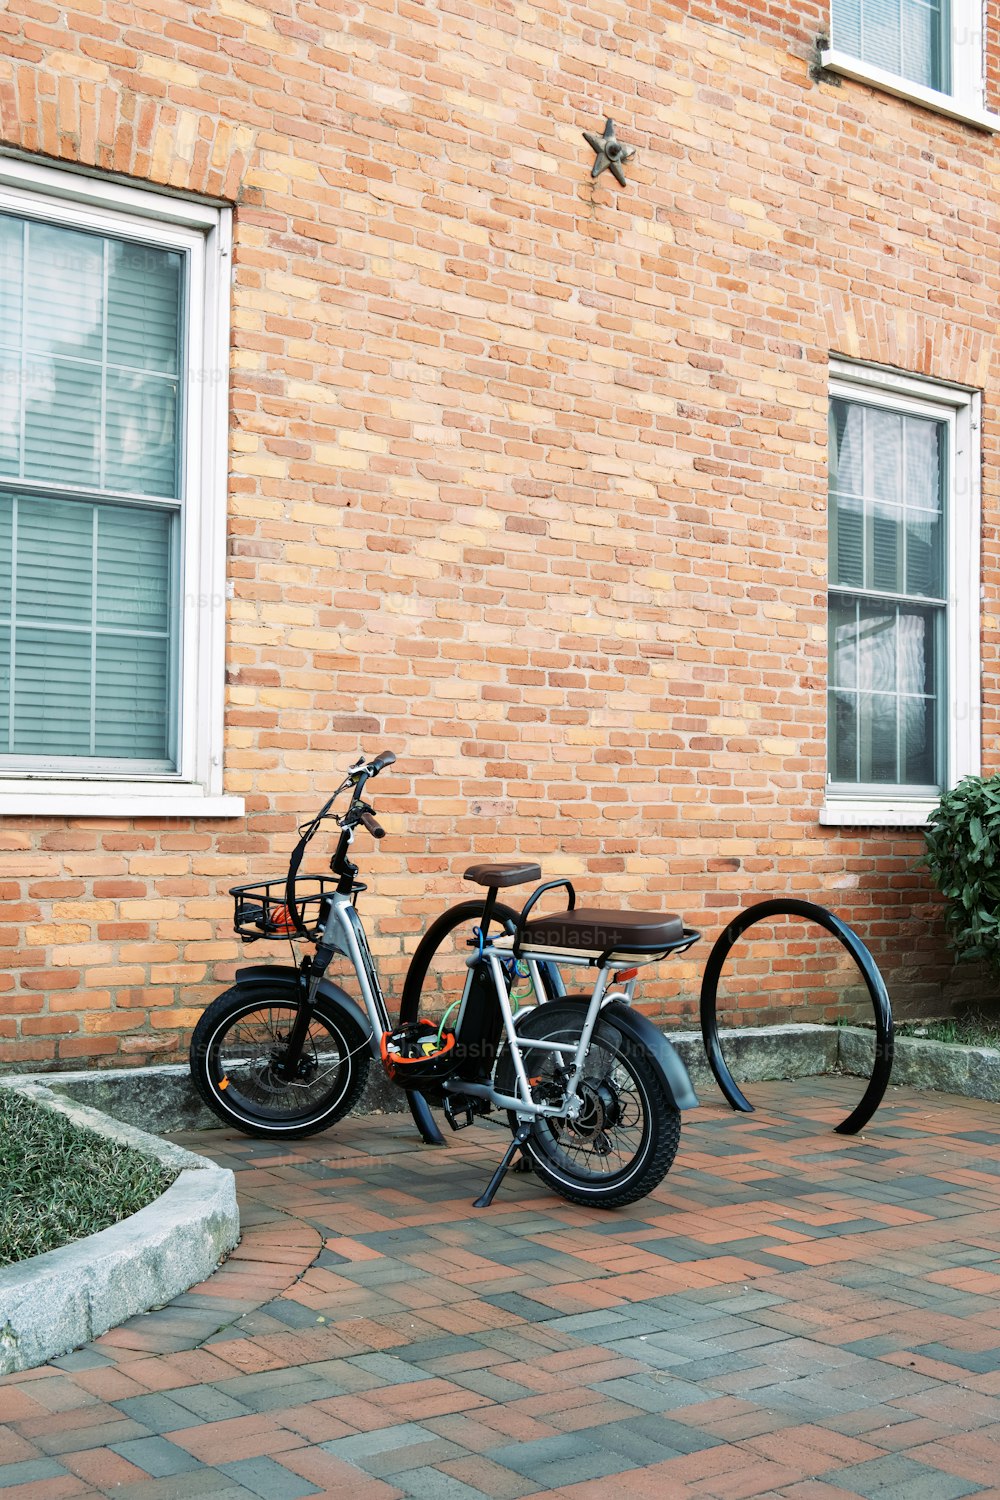 a couple of bikes parked next to a brick building